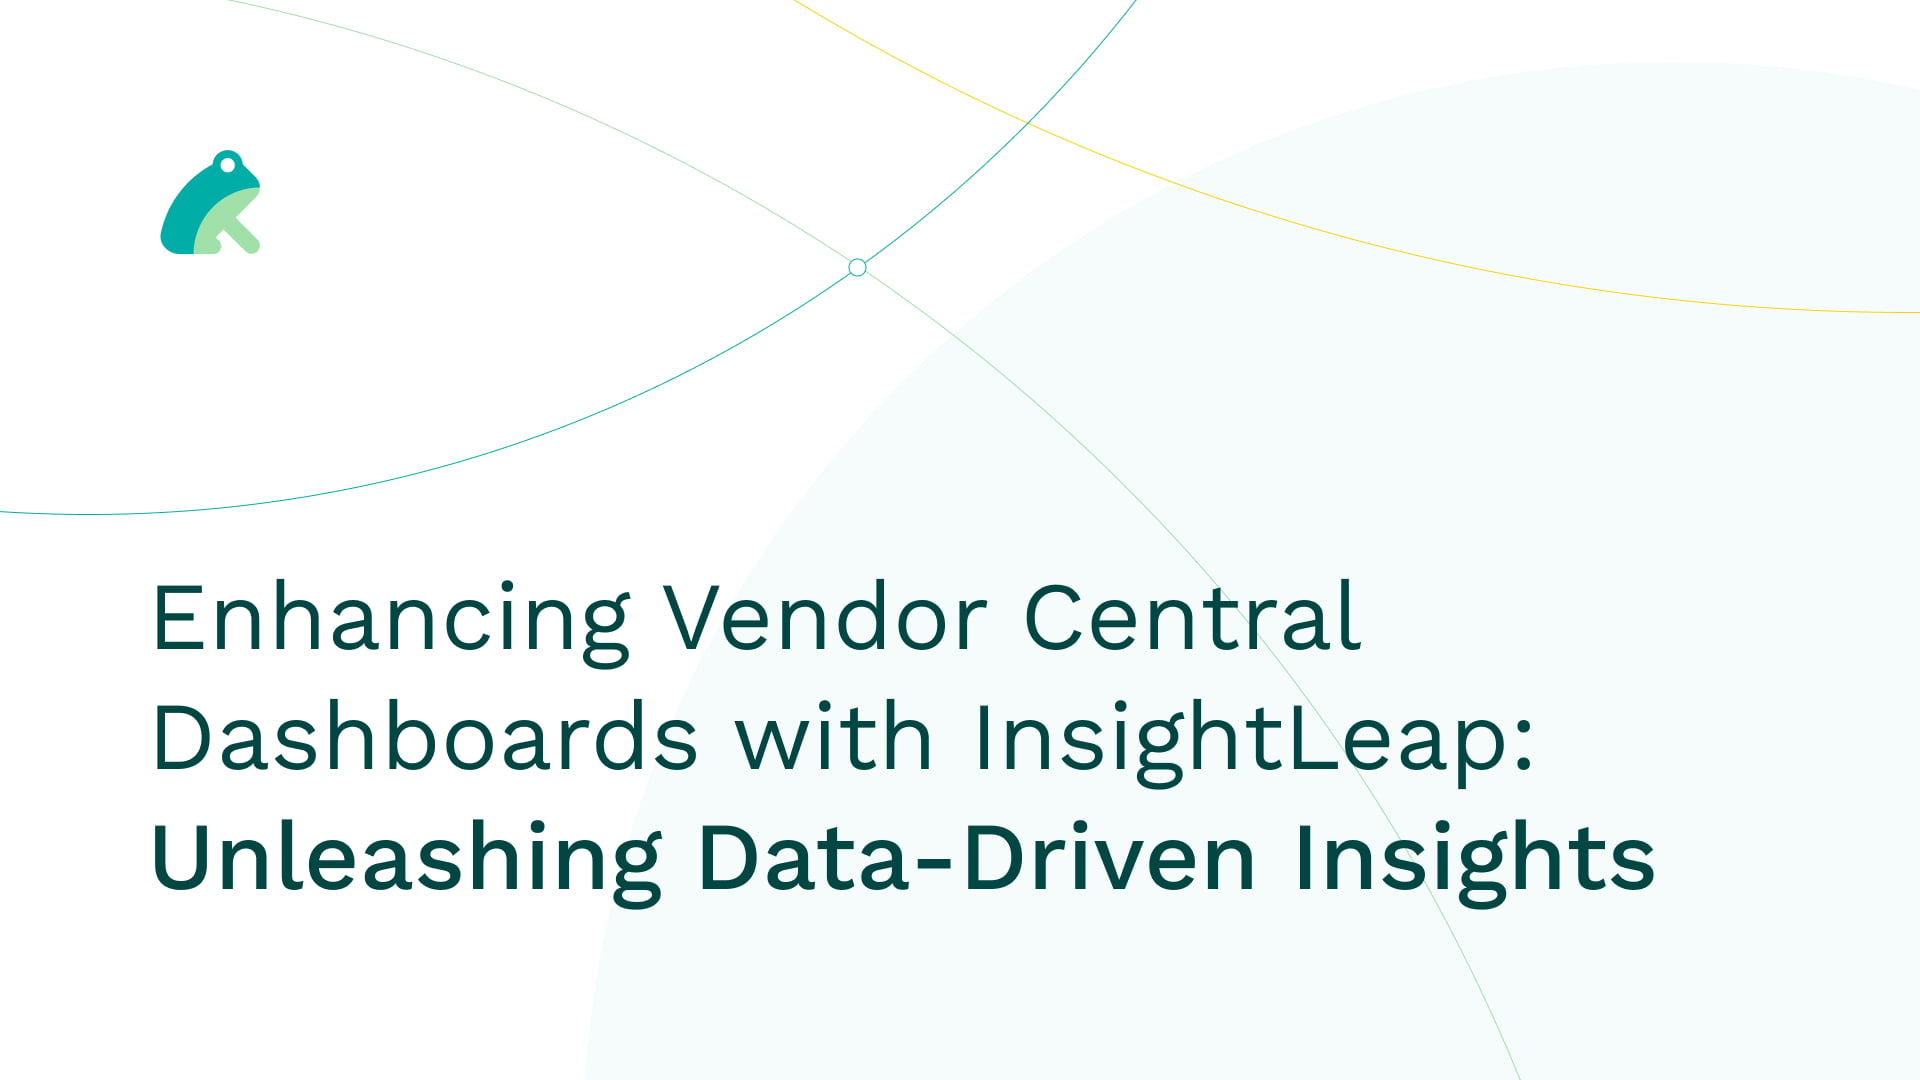 Enhancing Vendor Central Dashboards with InsightLeap: Unleashing Data-Driven Insights